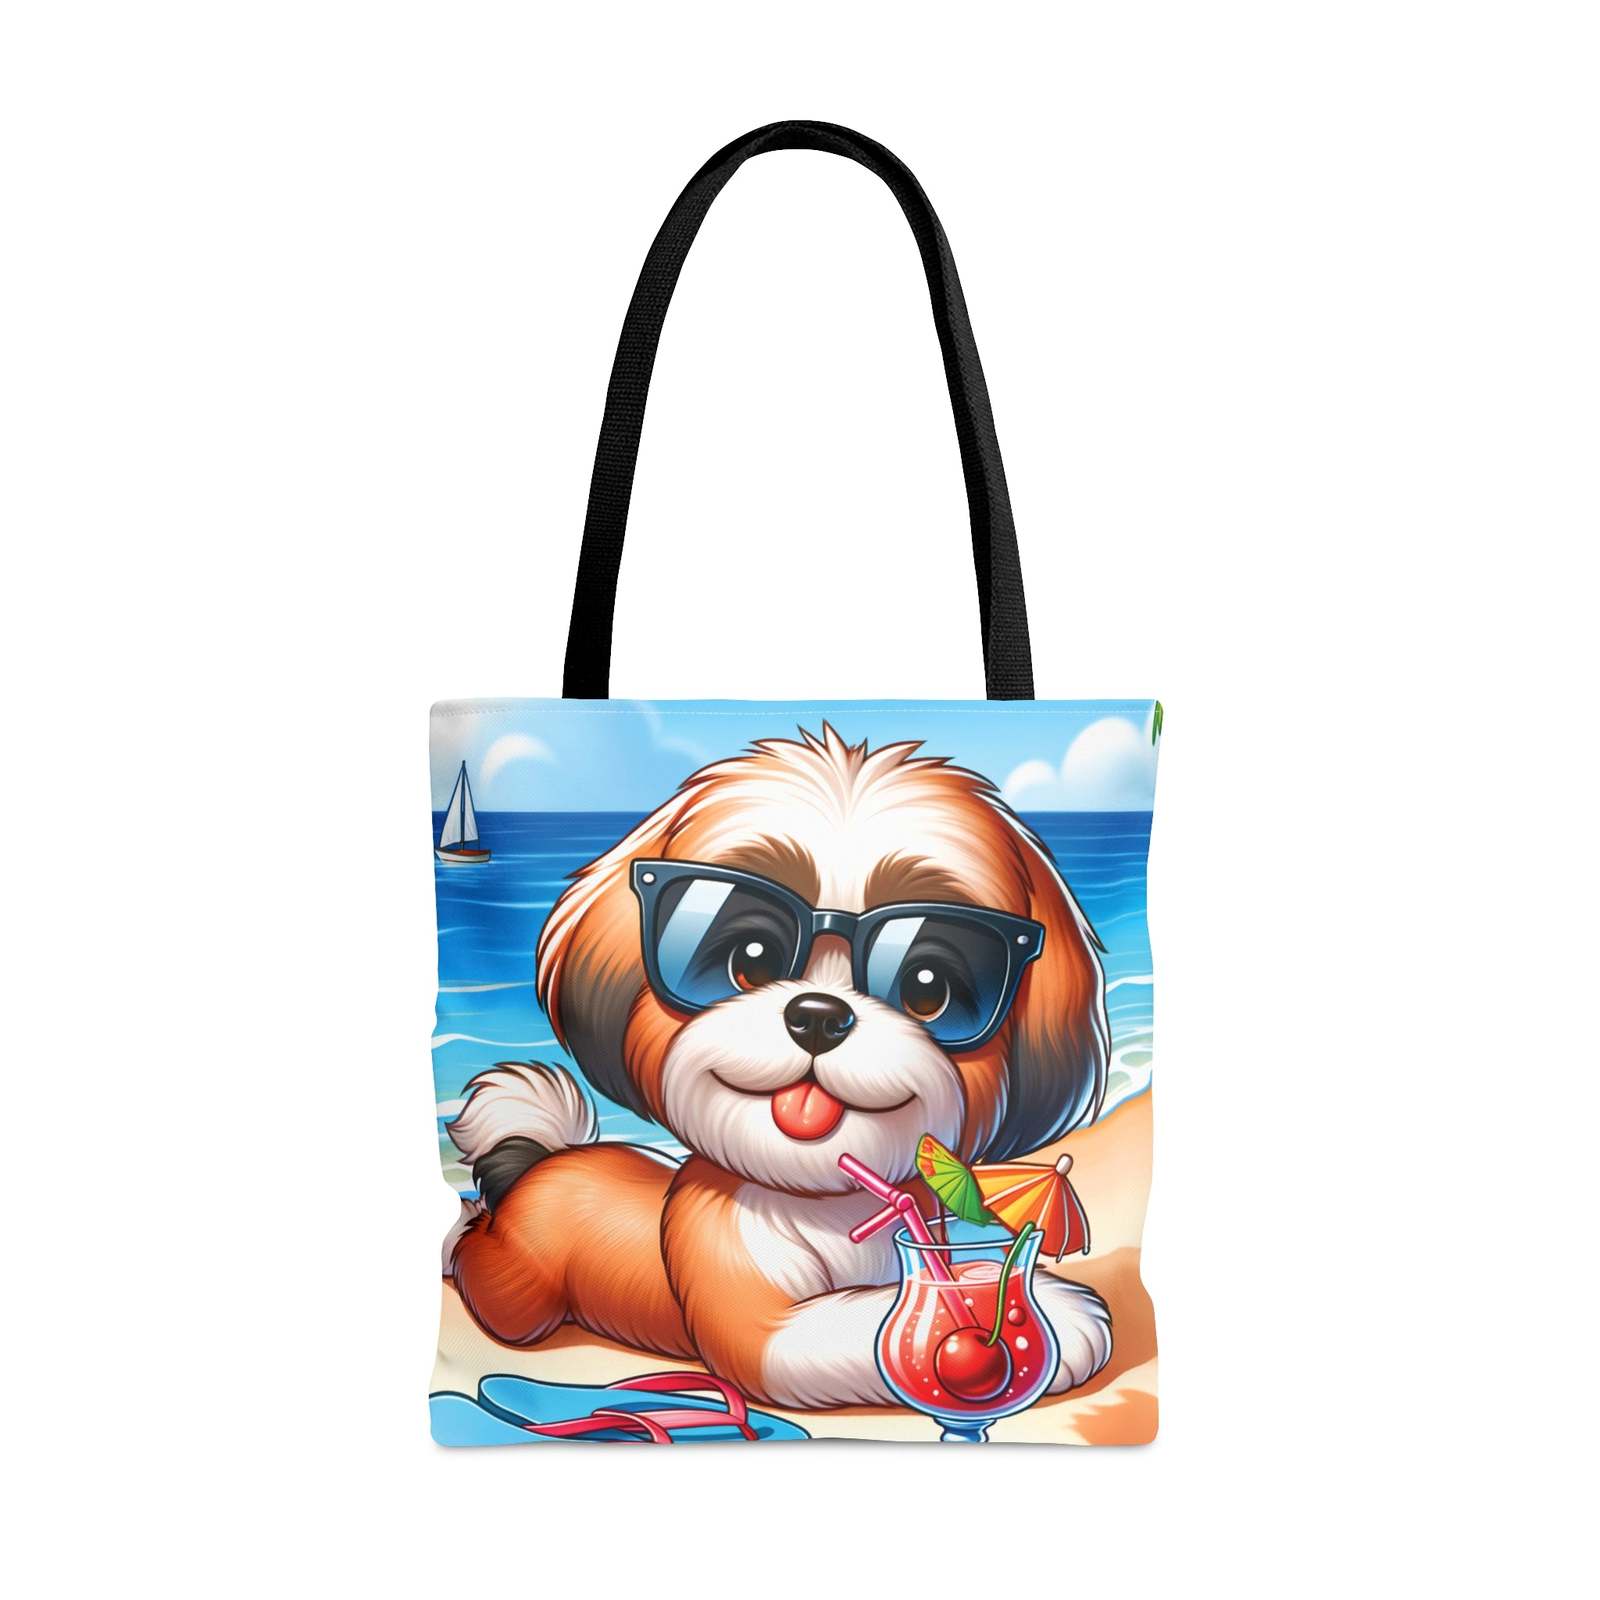 Primary image for Tote Bag, Dog on Beach, Lhasa Apso, Tote bag, 3 Sizes Available, awd-1220